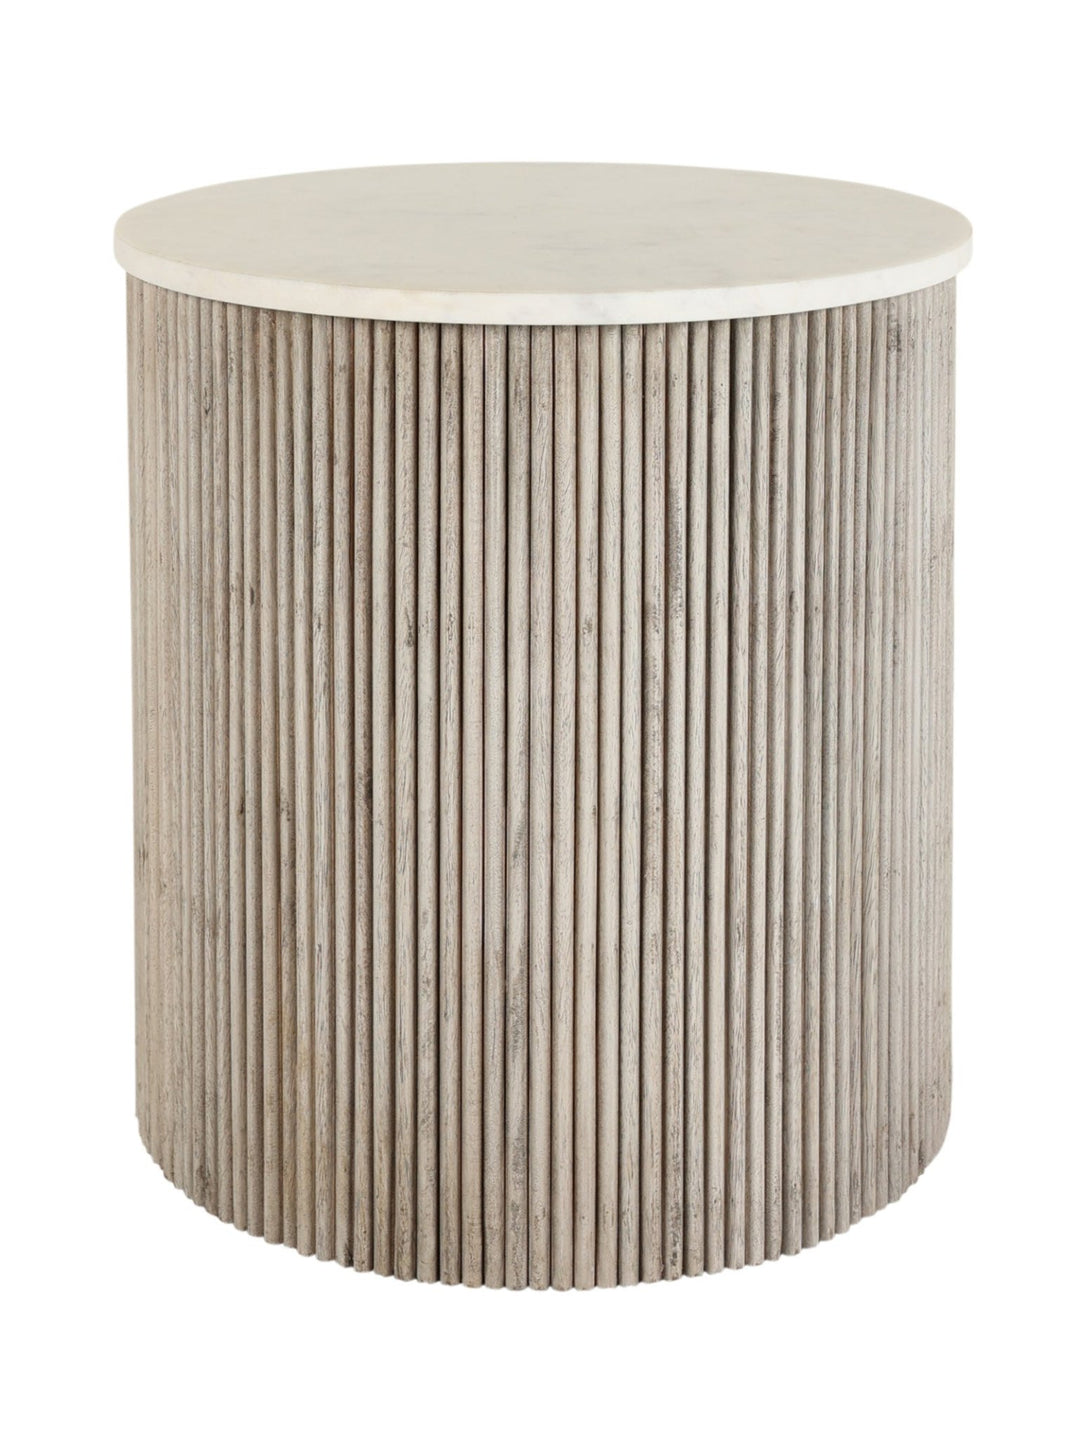 Stepwell Side Table in Sand Dune - side table - Hertex Haus - Furniture